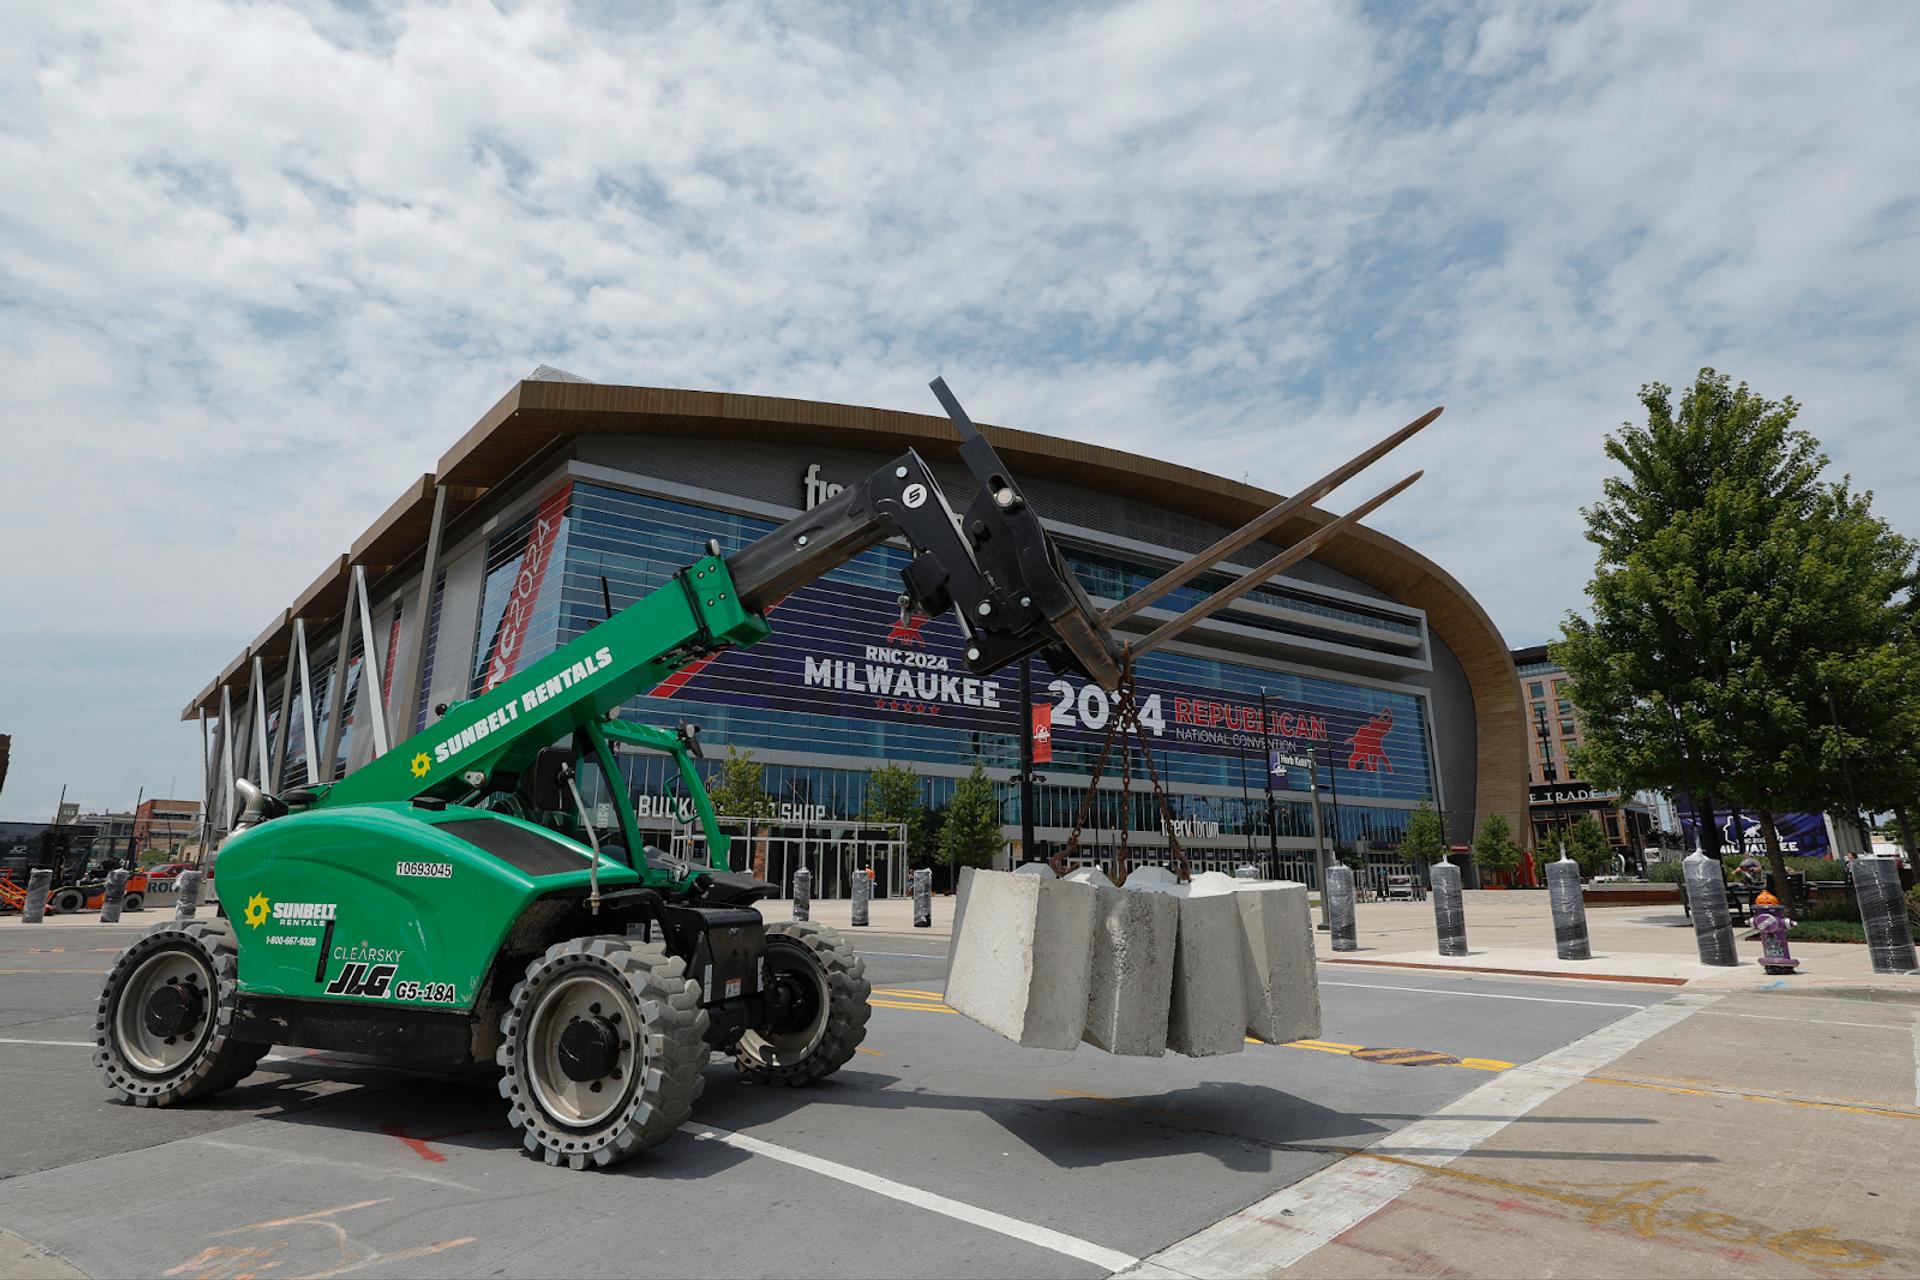 Security barricades are being set up outside the Fiserv Forum ahead of the 2024 Republican National Convention on July 11, 2024, in Milwaukee, Wisconsin